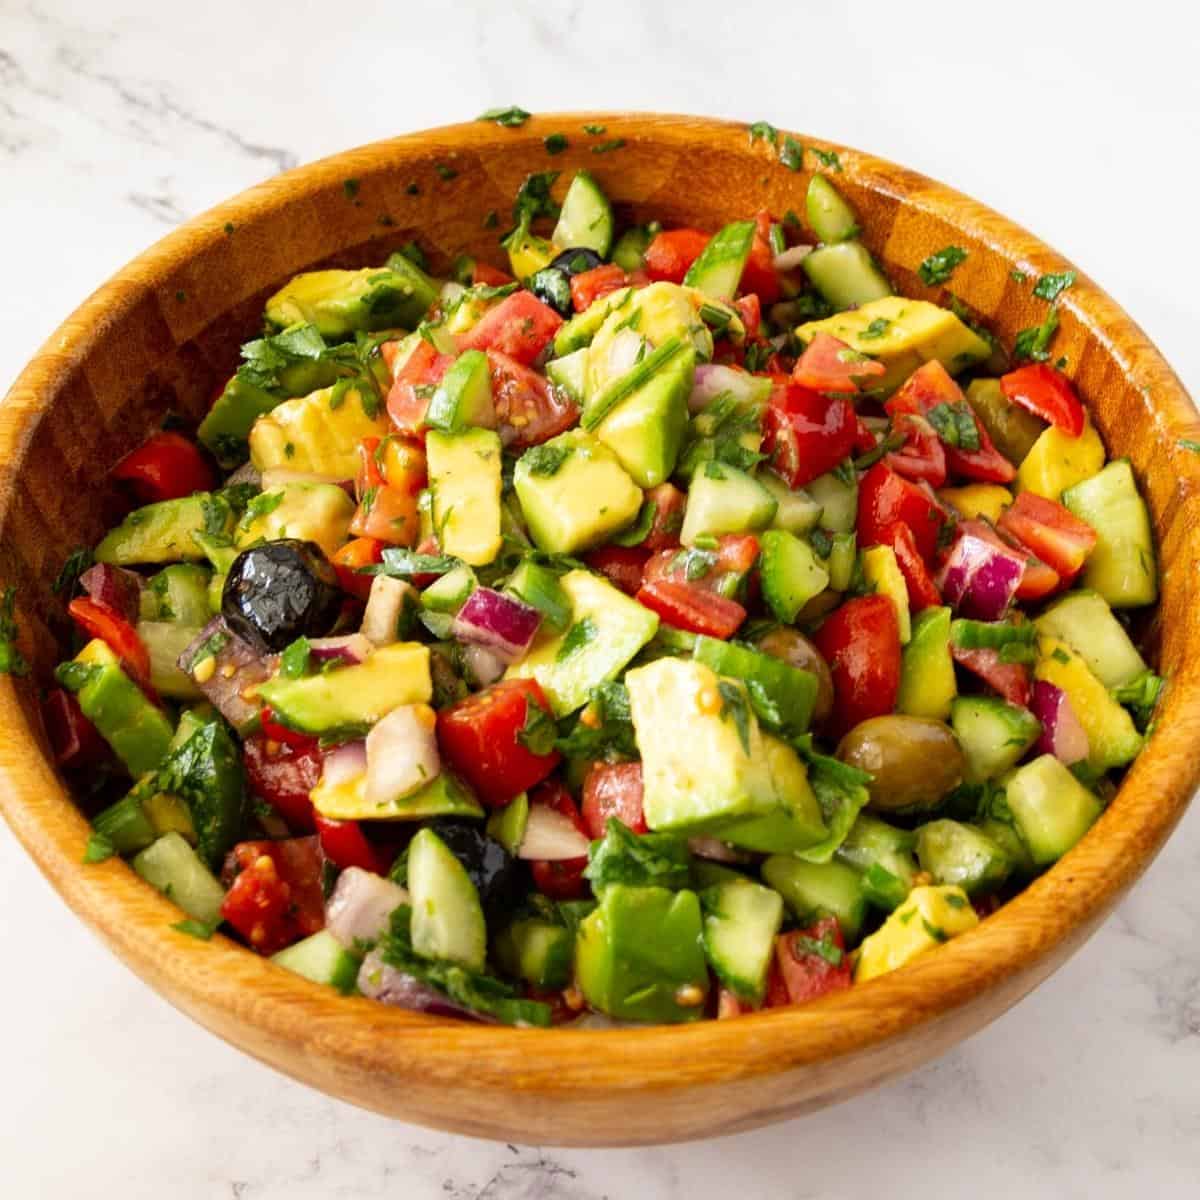 A bowl of salad with avocado and veggies.